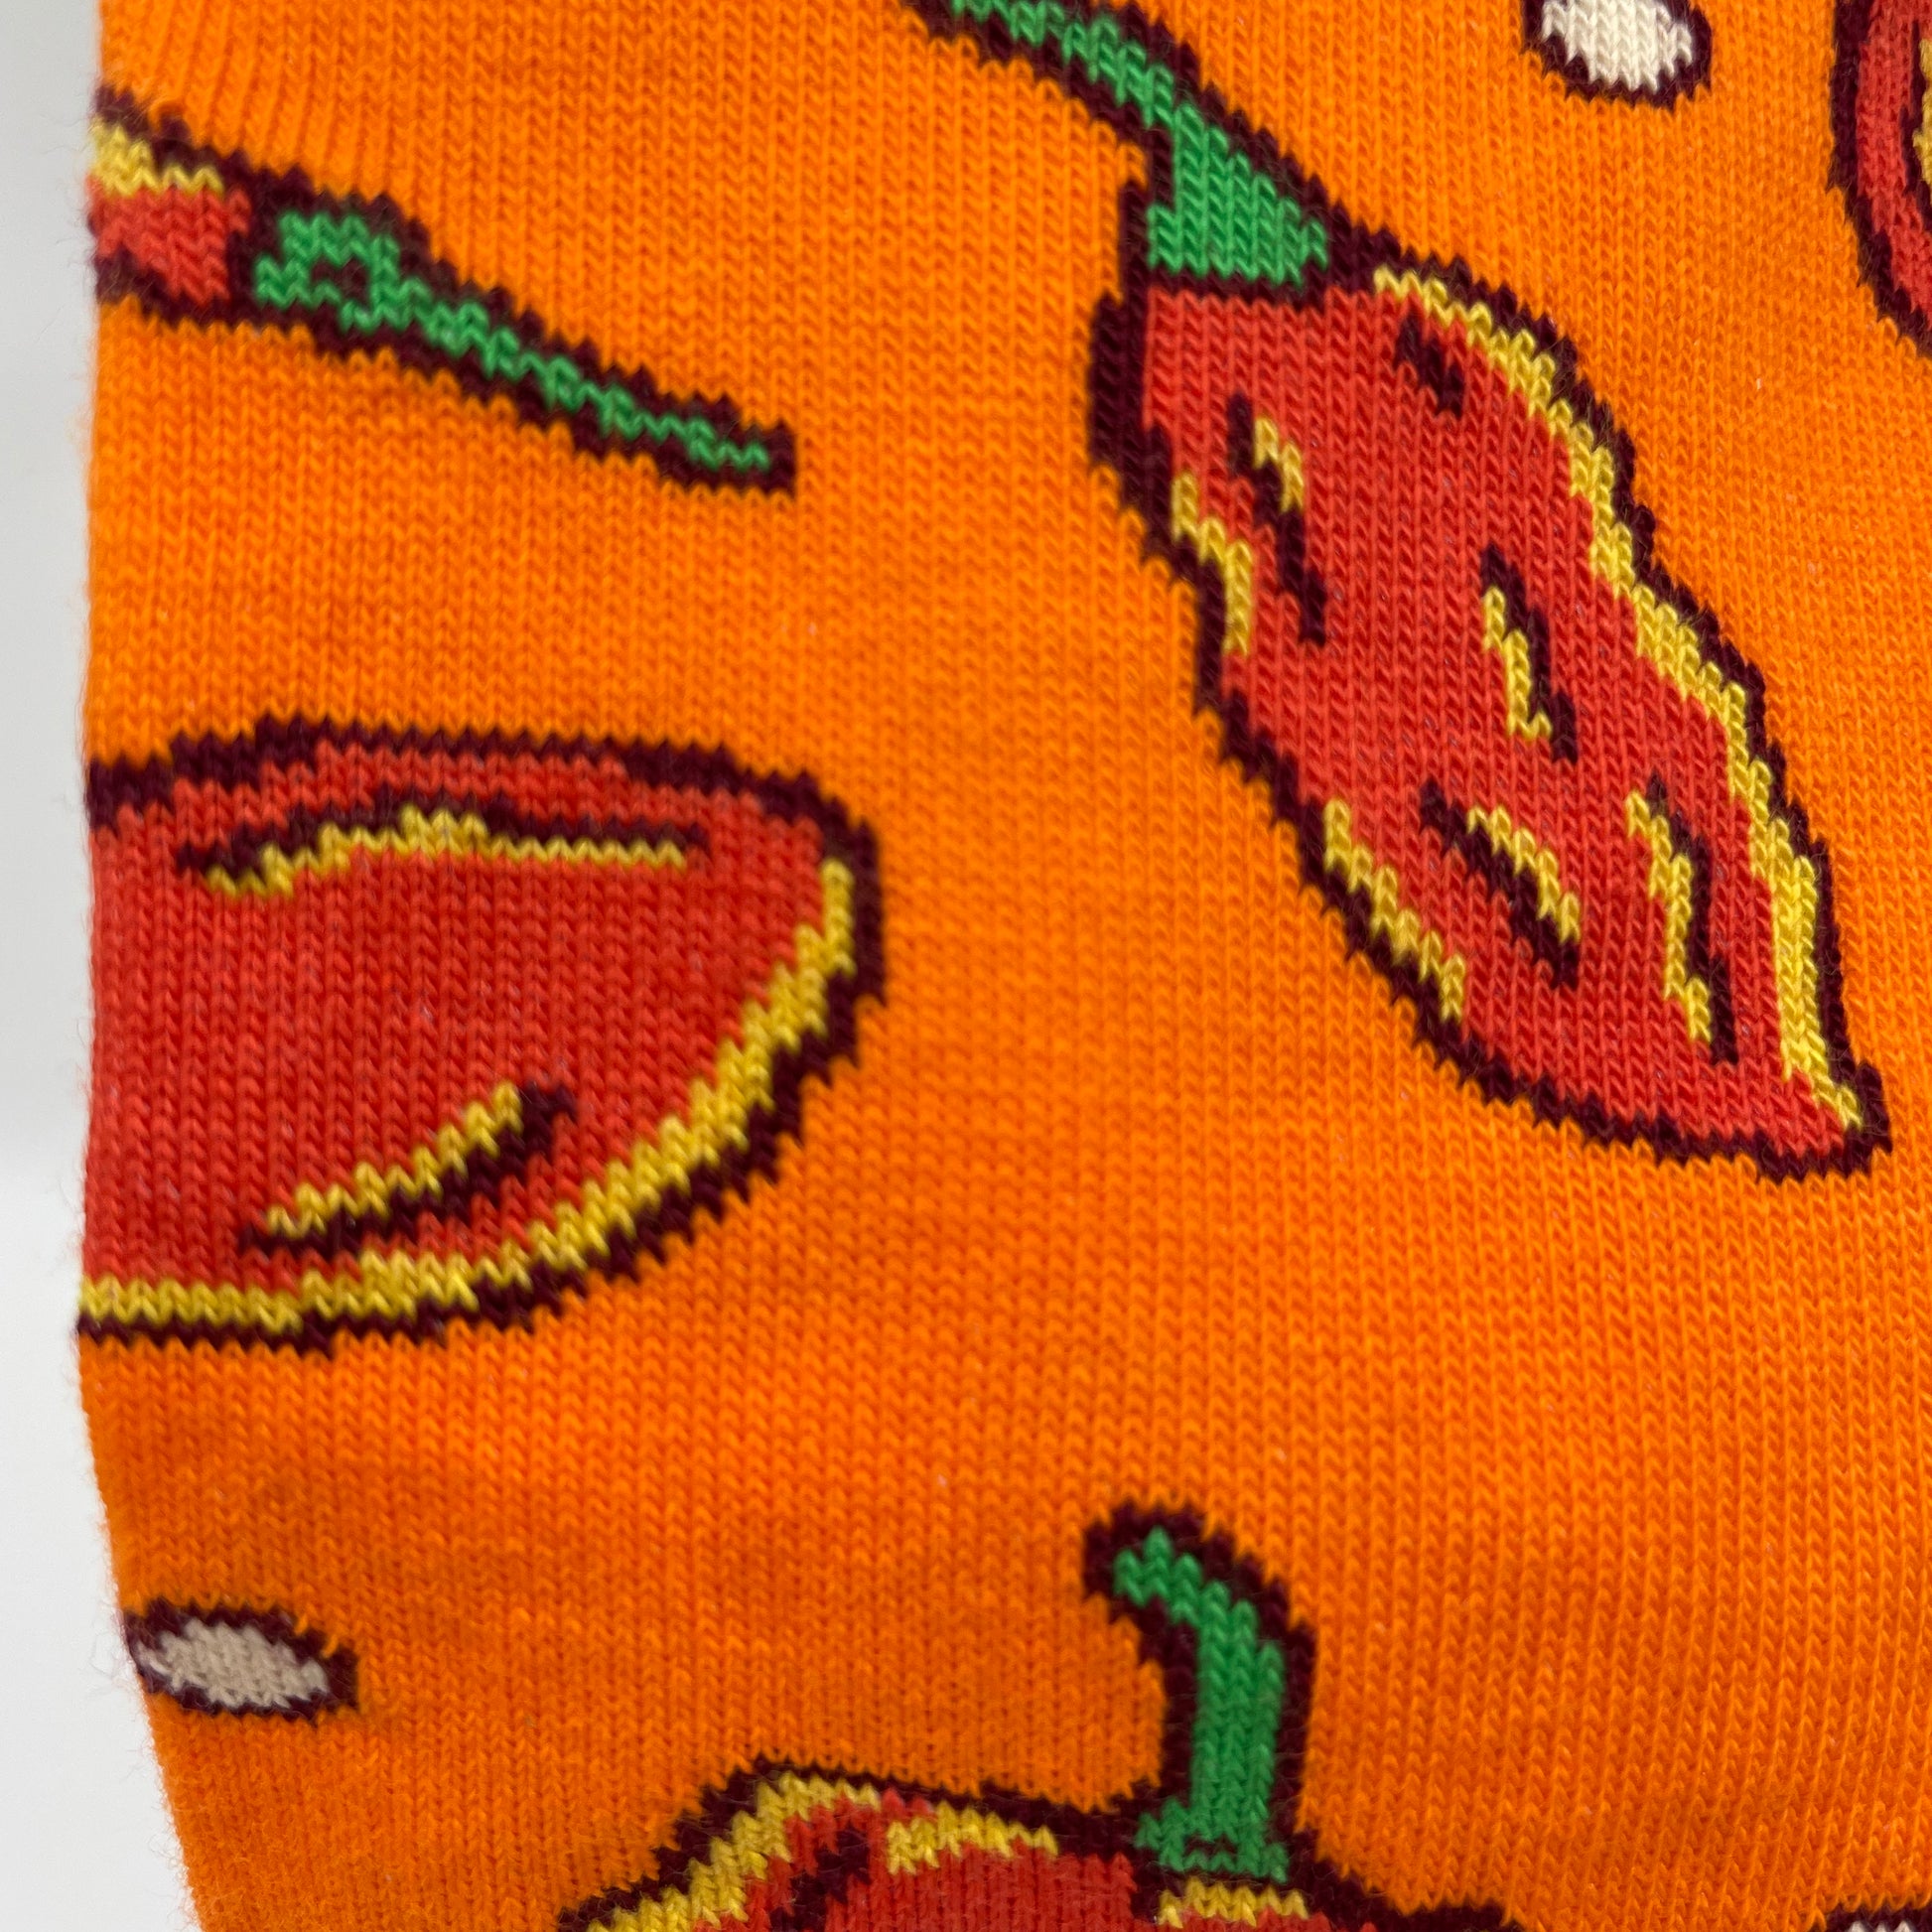 A close-up photo shows detail of a hot pepper pattern woven into an orange organic cotton sock.